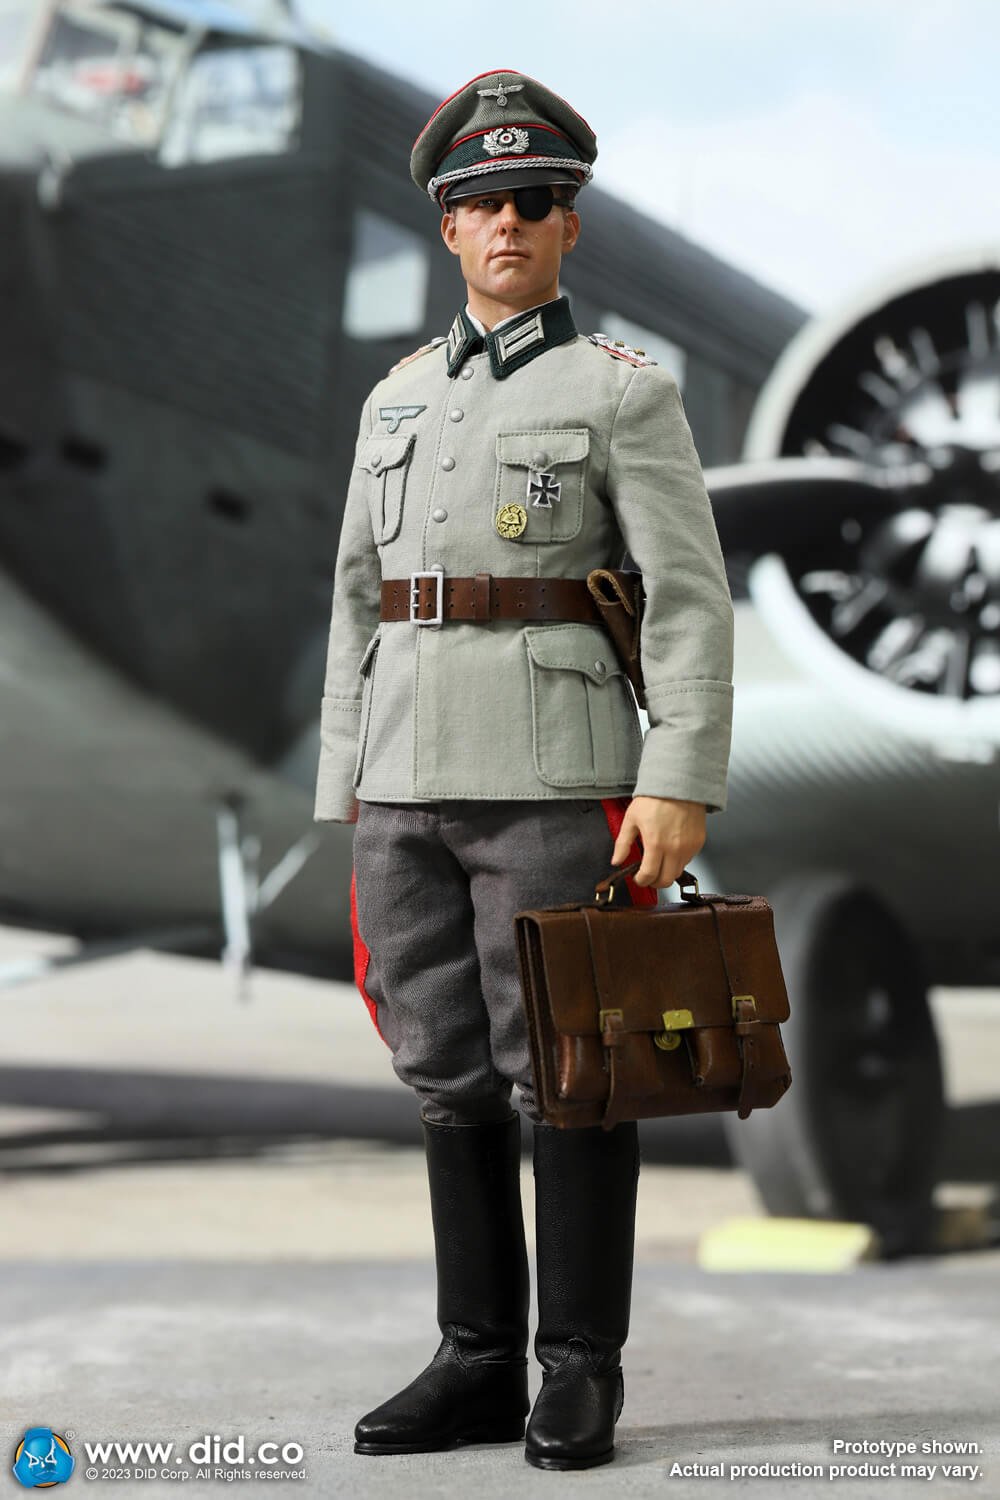 OperationValkyrie - NEW PRODUCT: DiD: D80162 Oberst I.G. Claus Von Stauffenberg  OPERATION VALKYRIE 11897